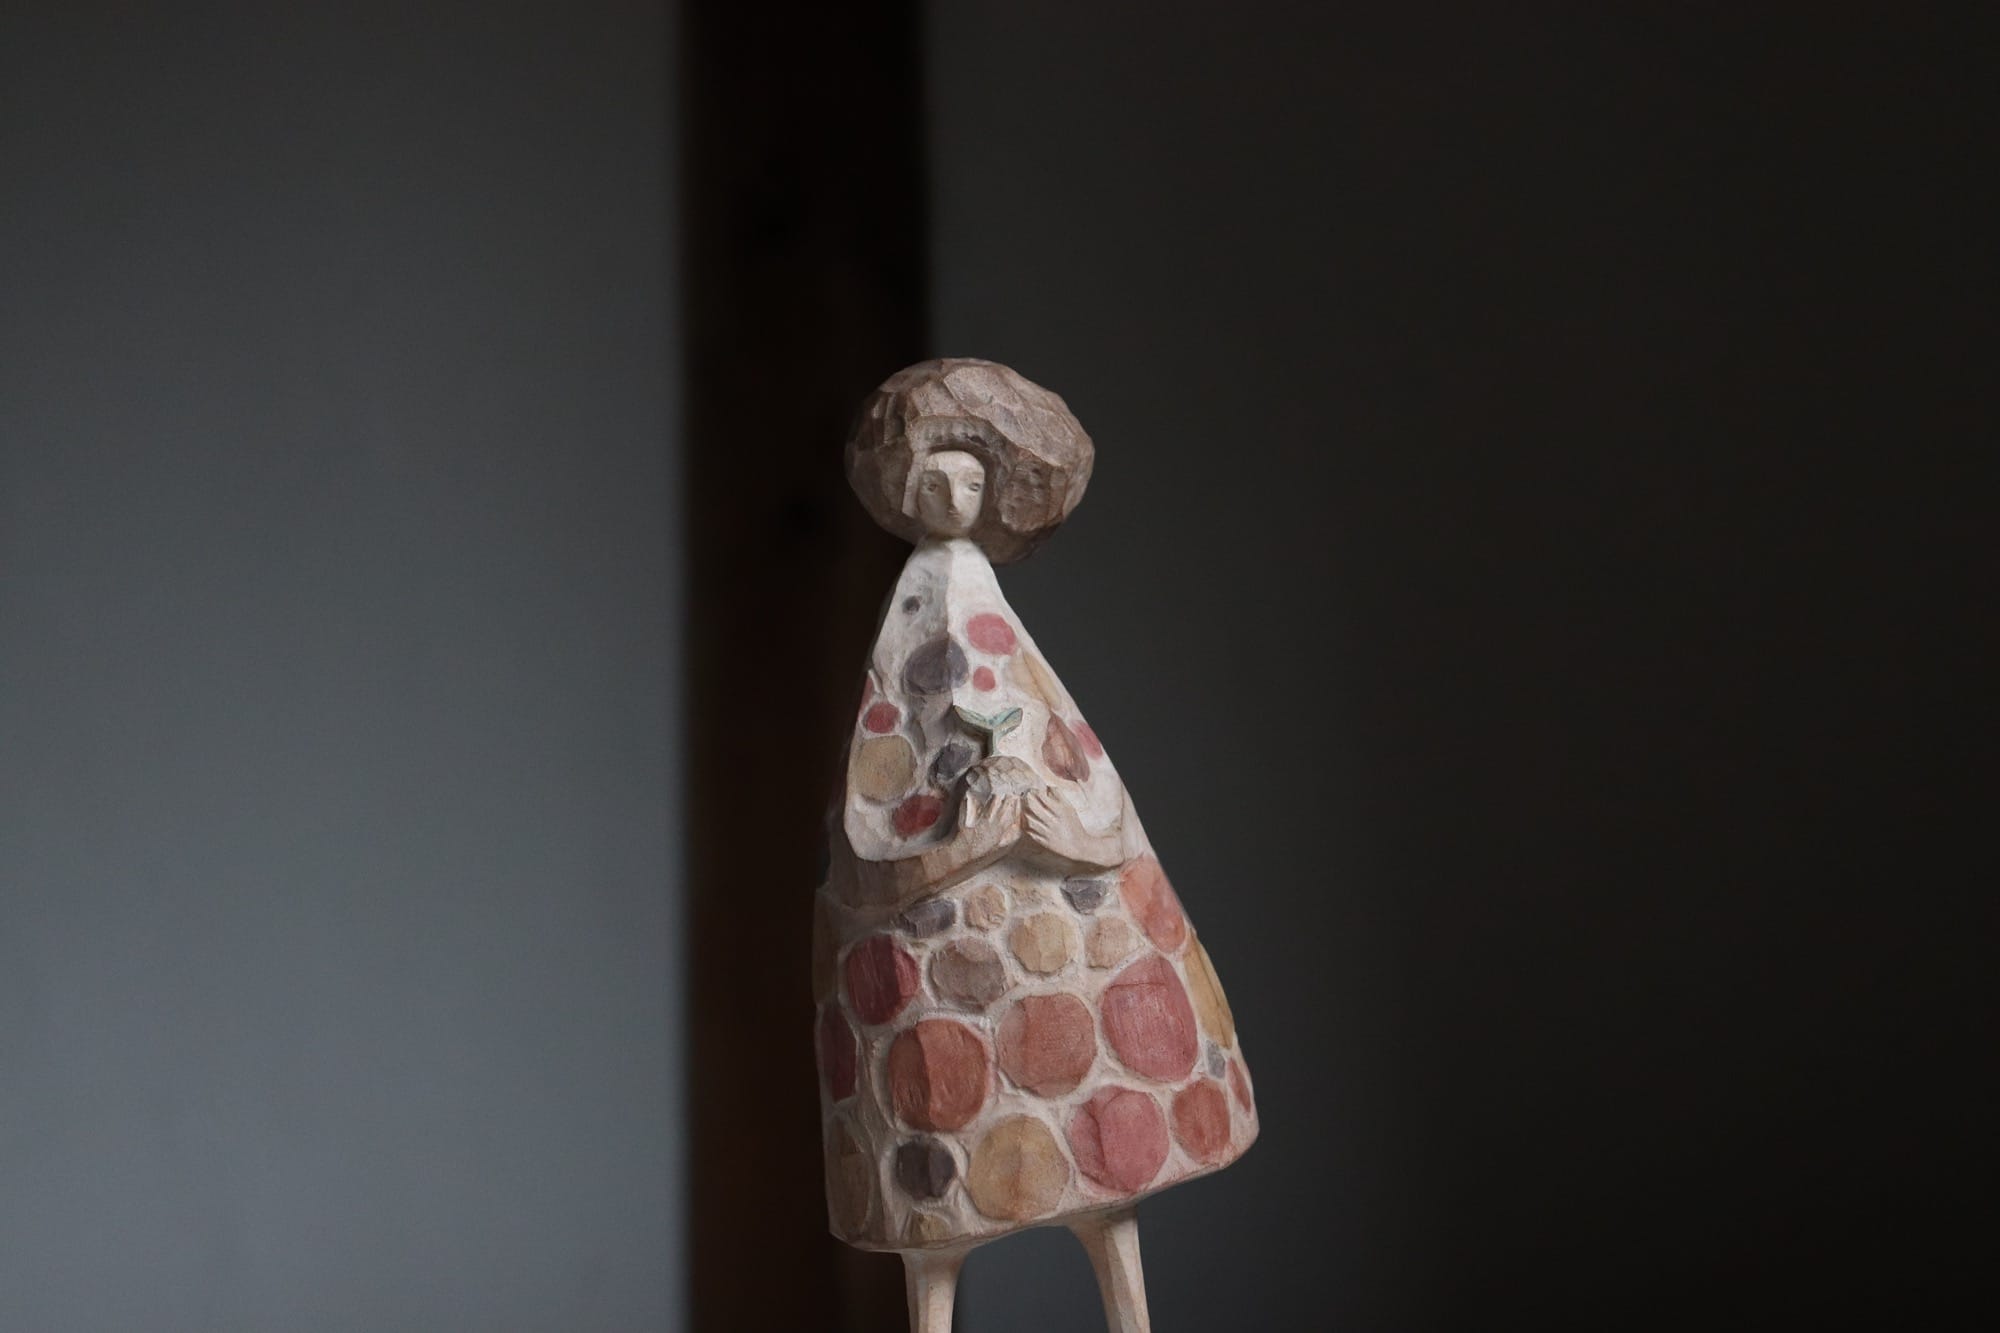 a wooden sculpture of a figure wearing a colorful dotted dress, with hair that appears to be blowing in the wind